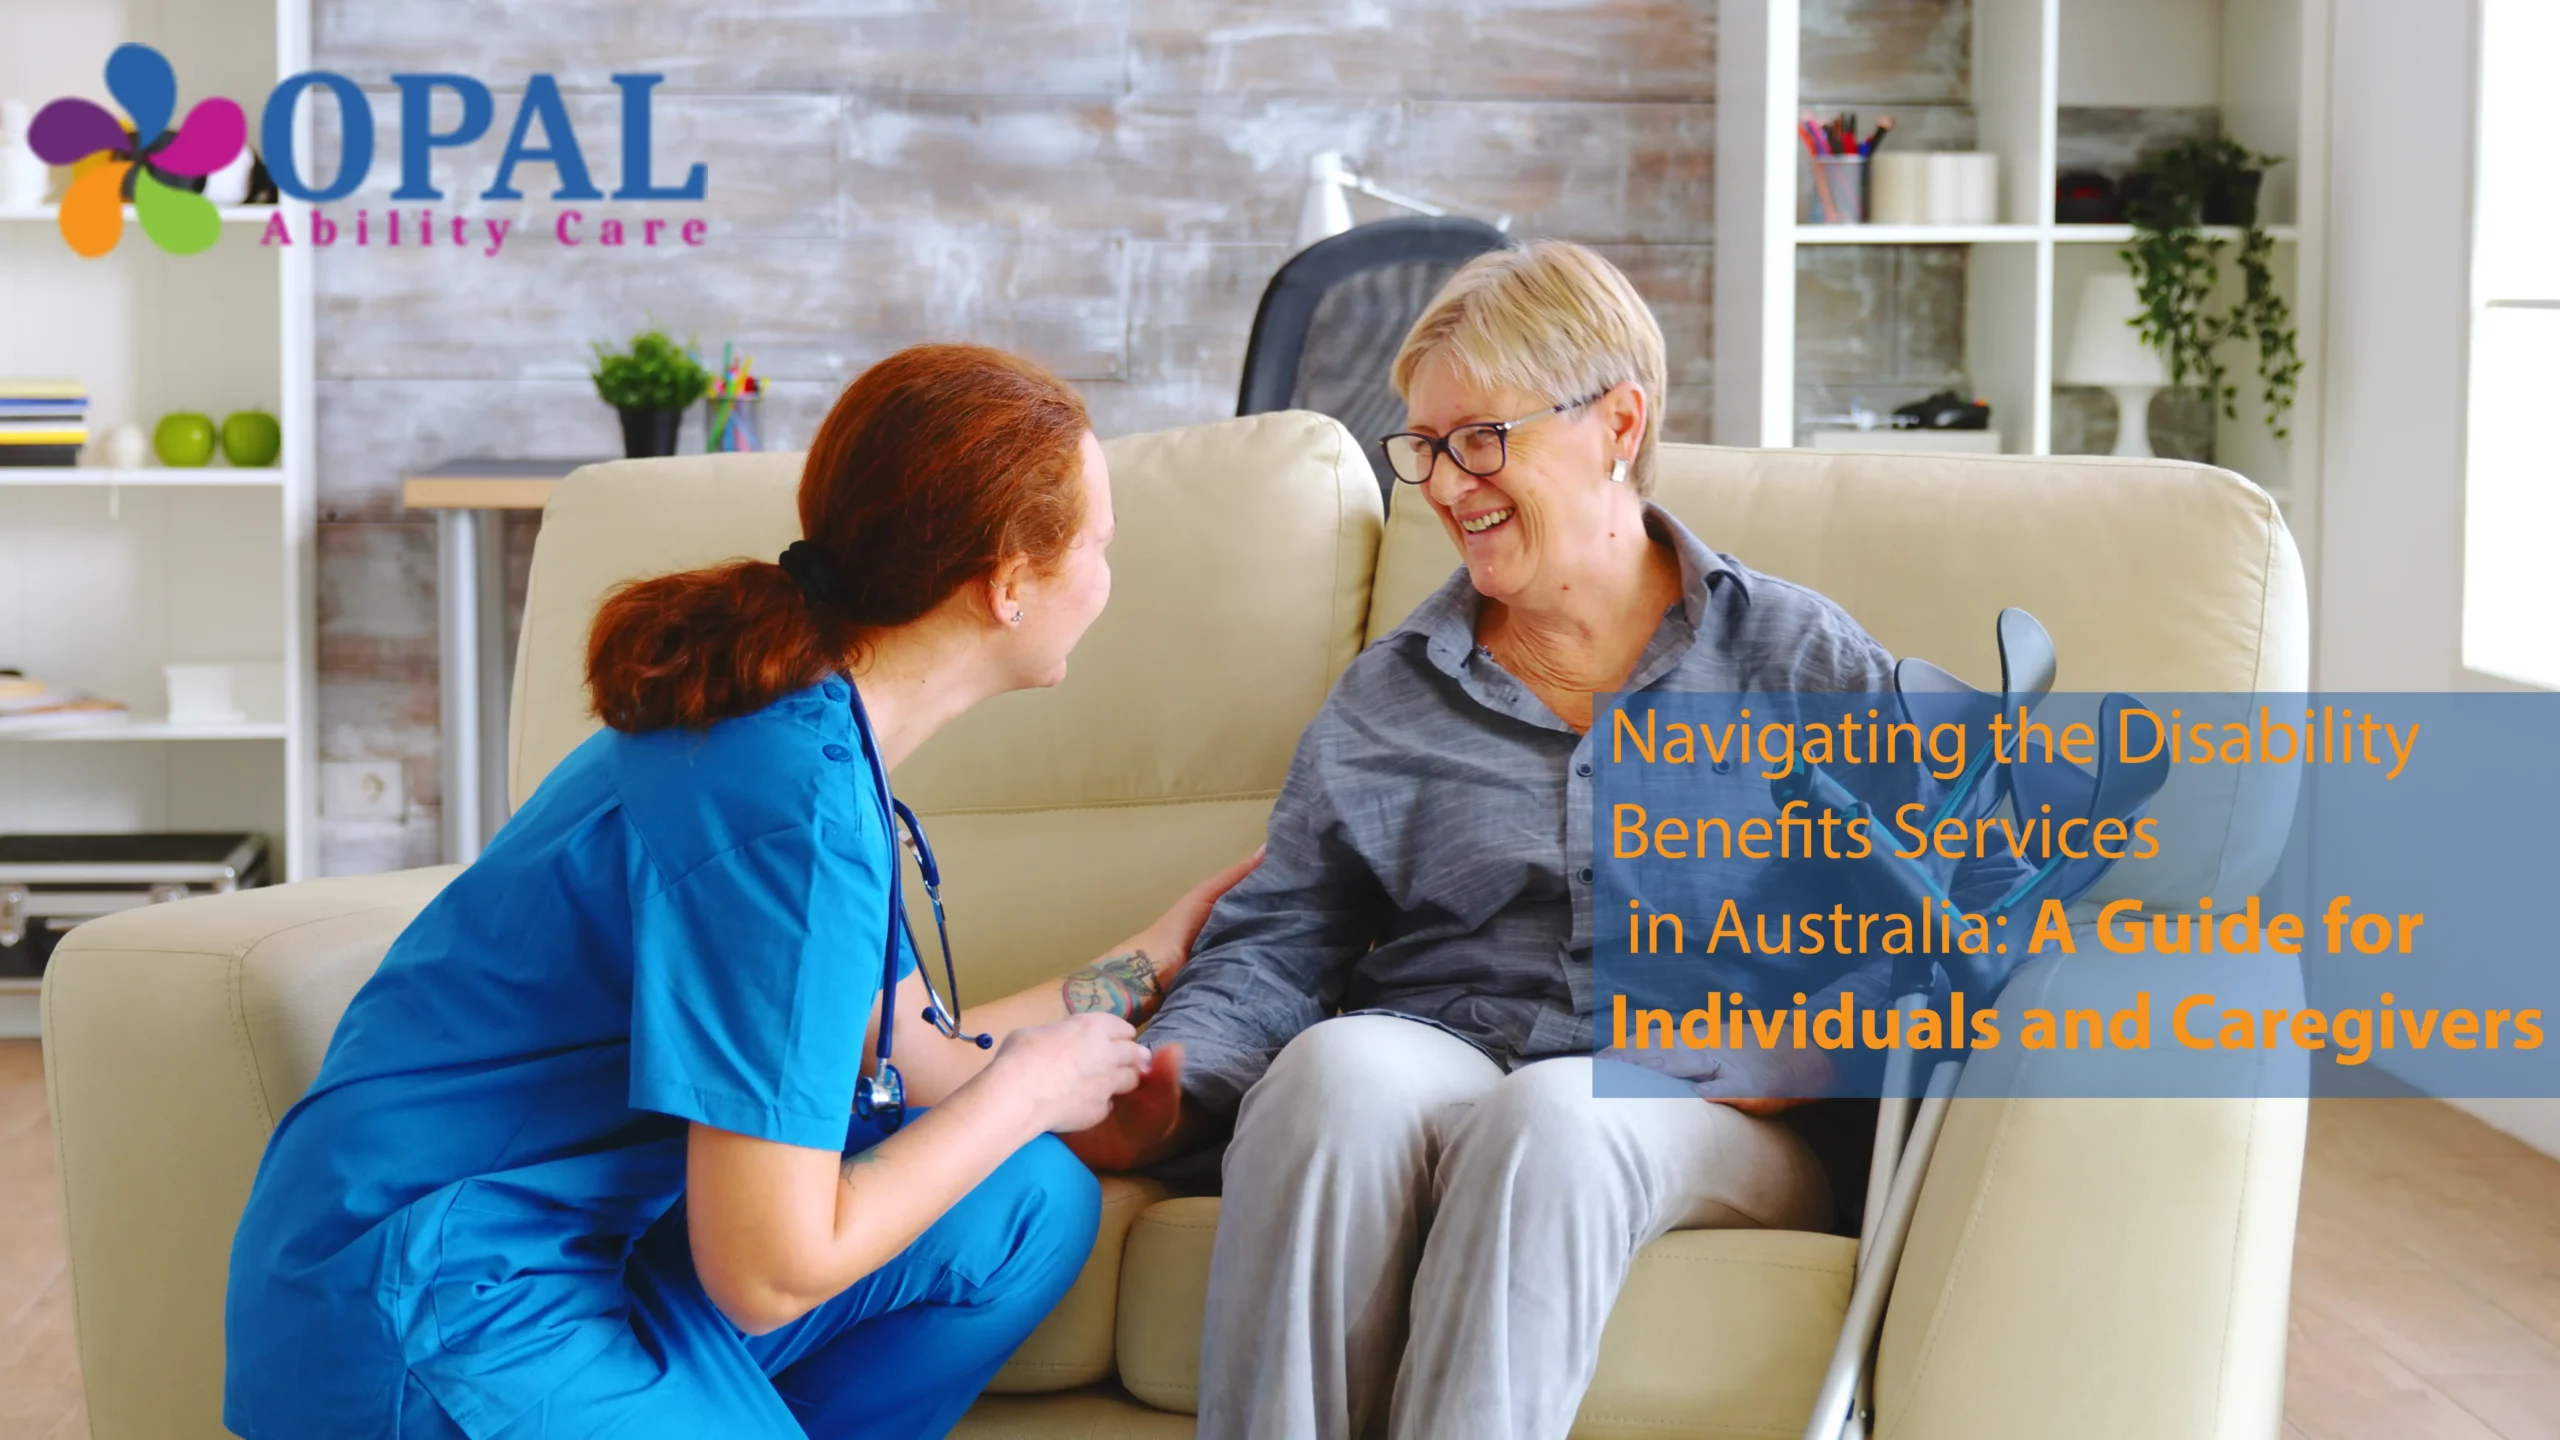 Navigating the Disability Benefits Services in Australia: A Guide for Individuals and Caregivers